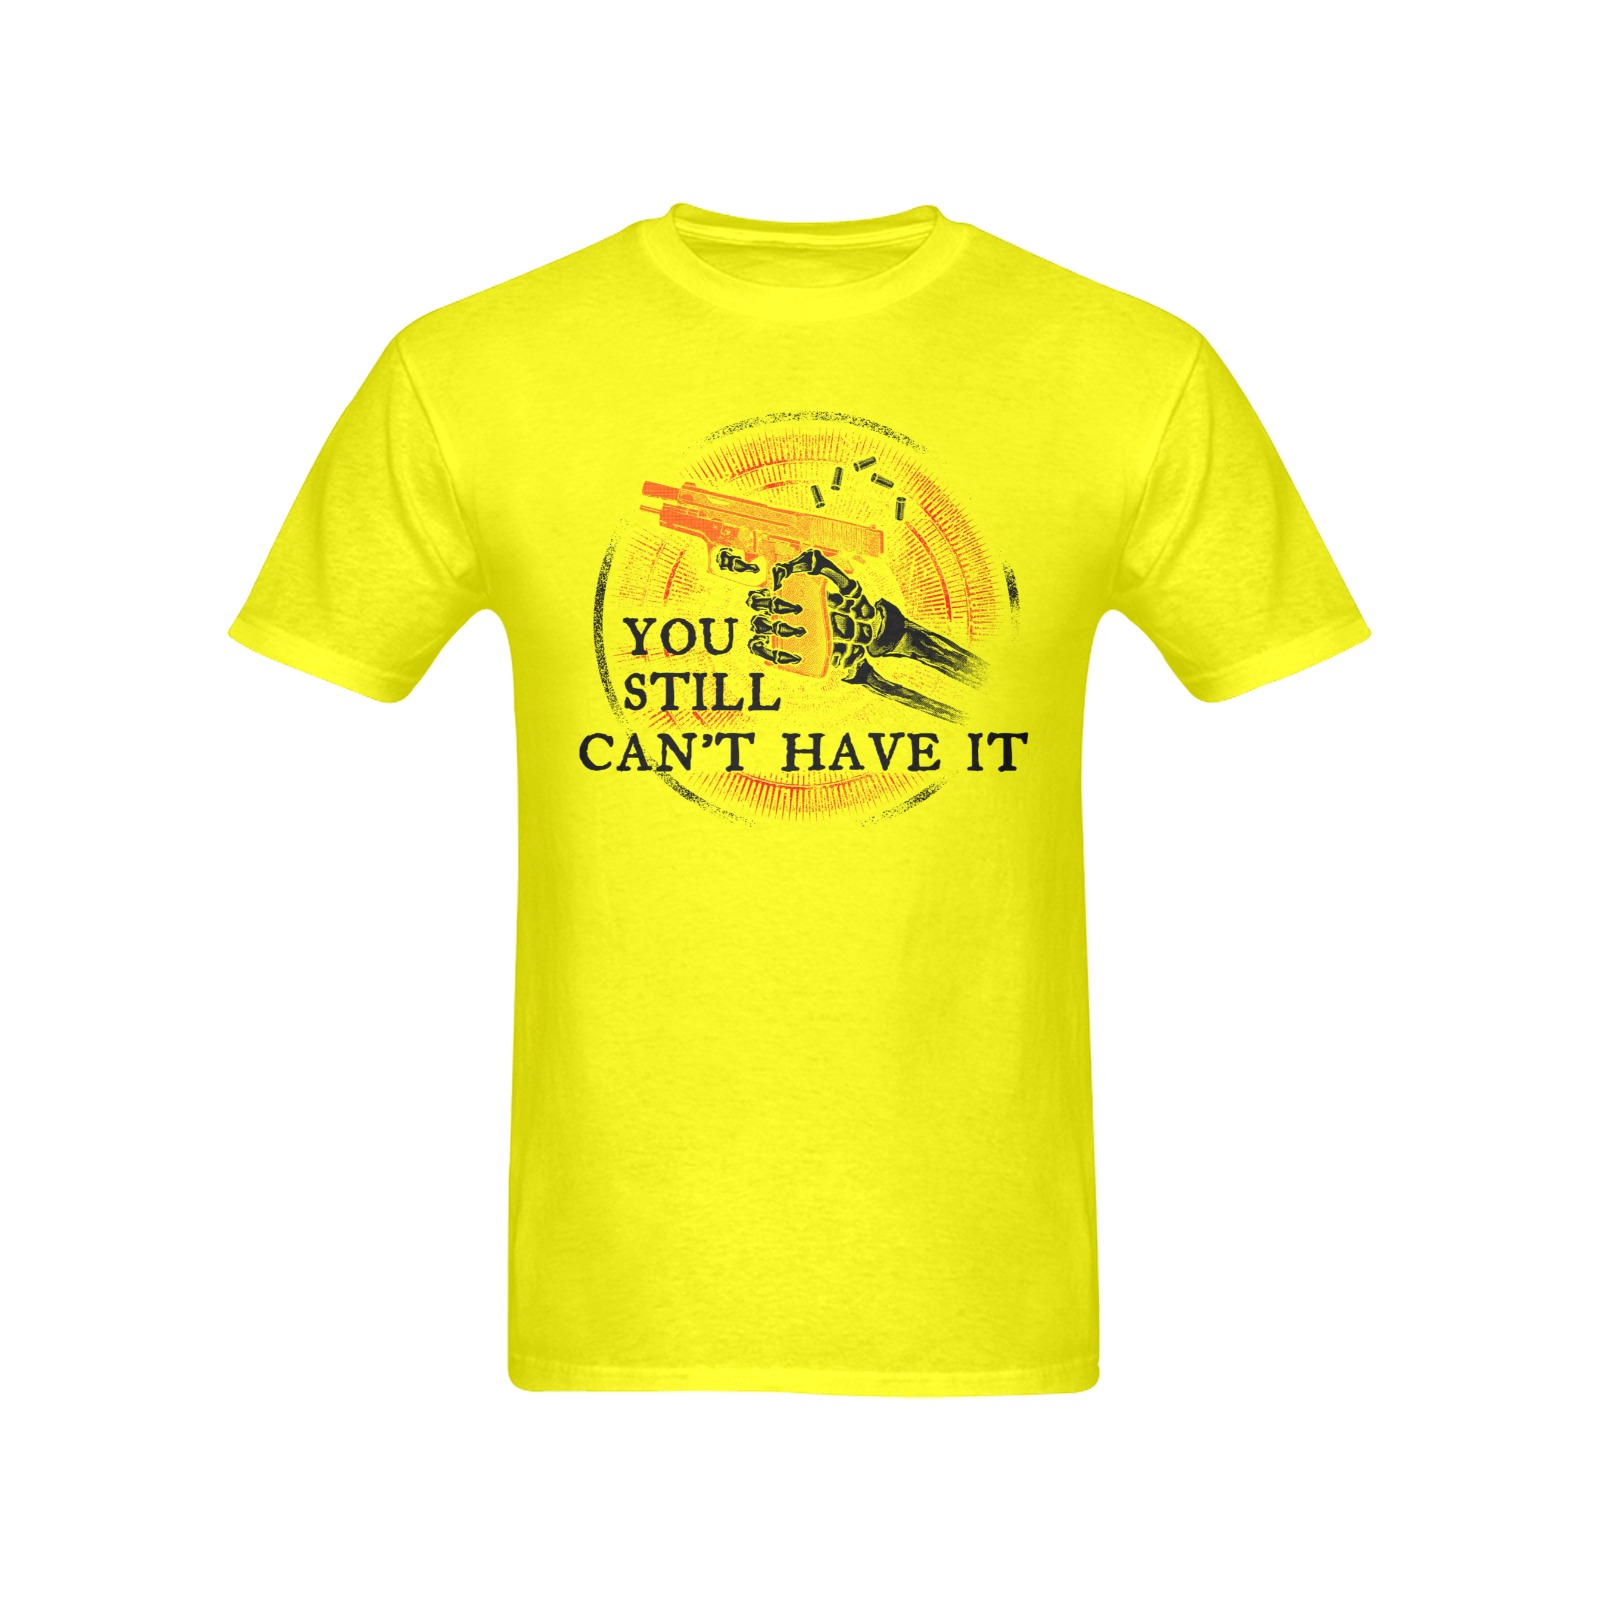 “You Still Can’t Have It” – Men’s T-Shirt | Yellow